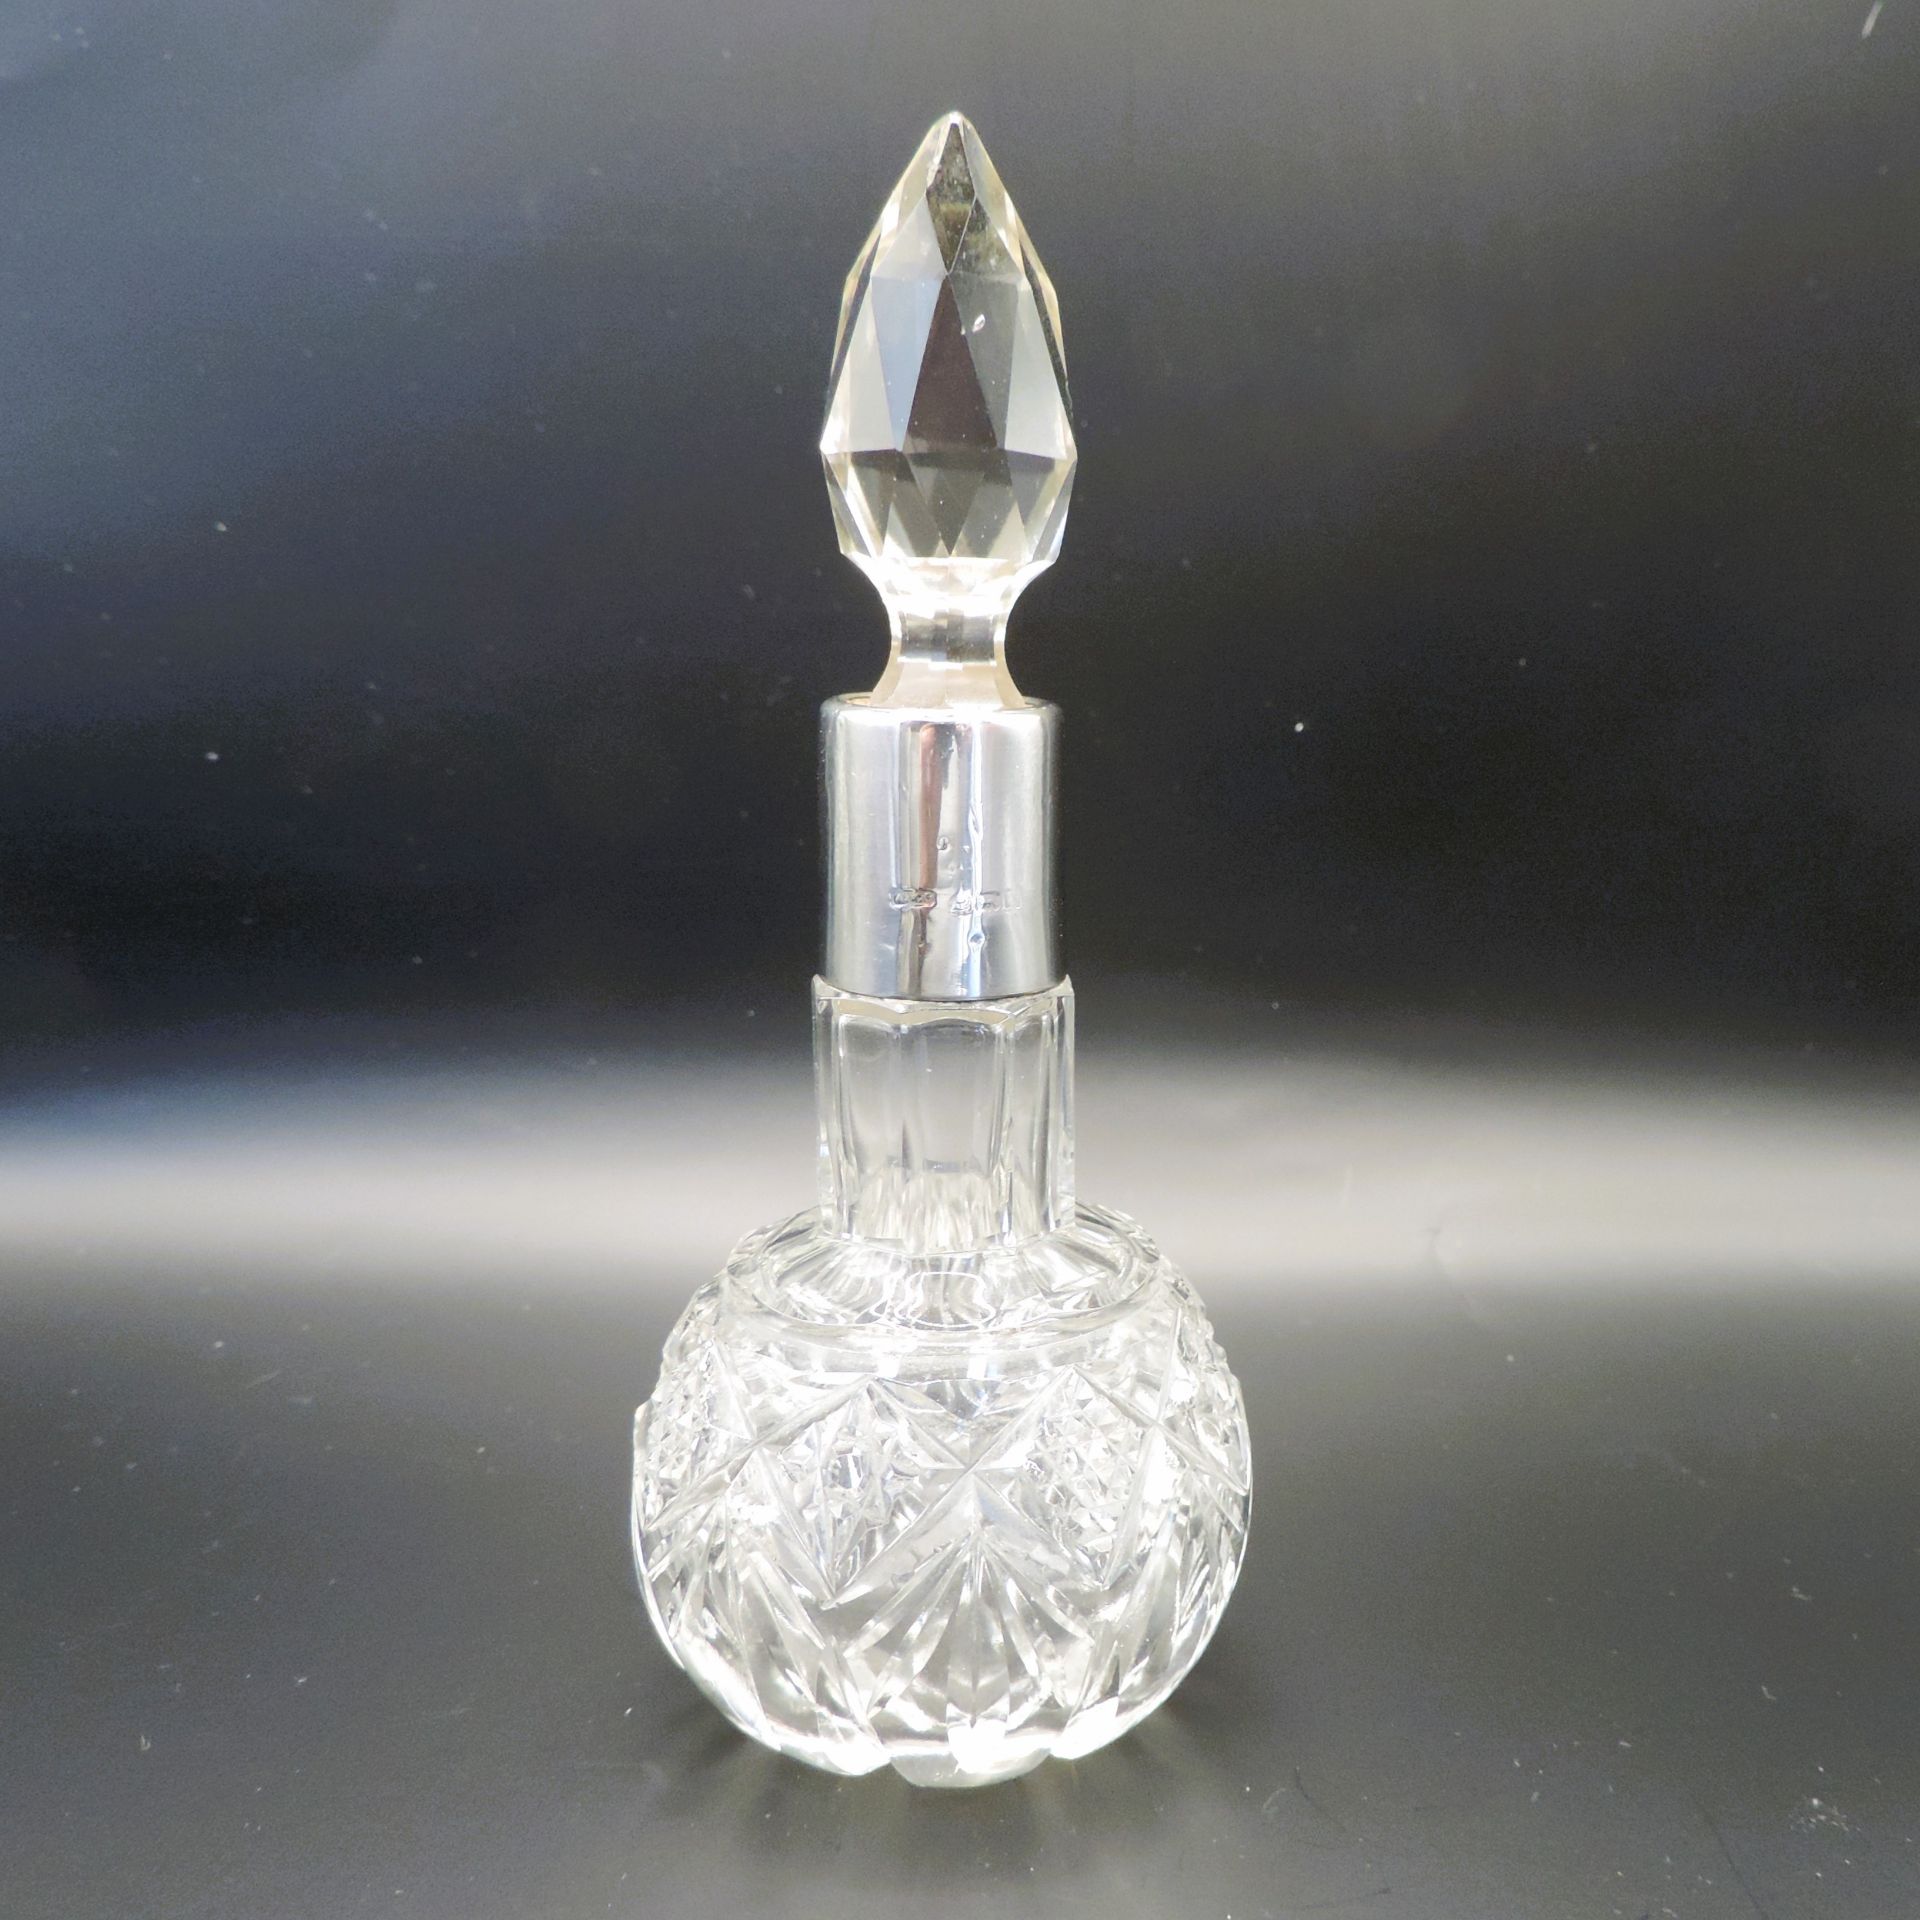 Antique Victorian Cut Glass Perfume Bottle Sterling Silver Collar Birmingham 1897 - Image 4 of 4